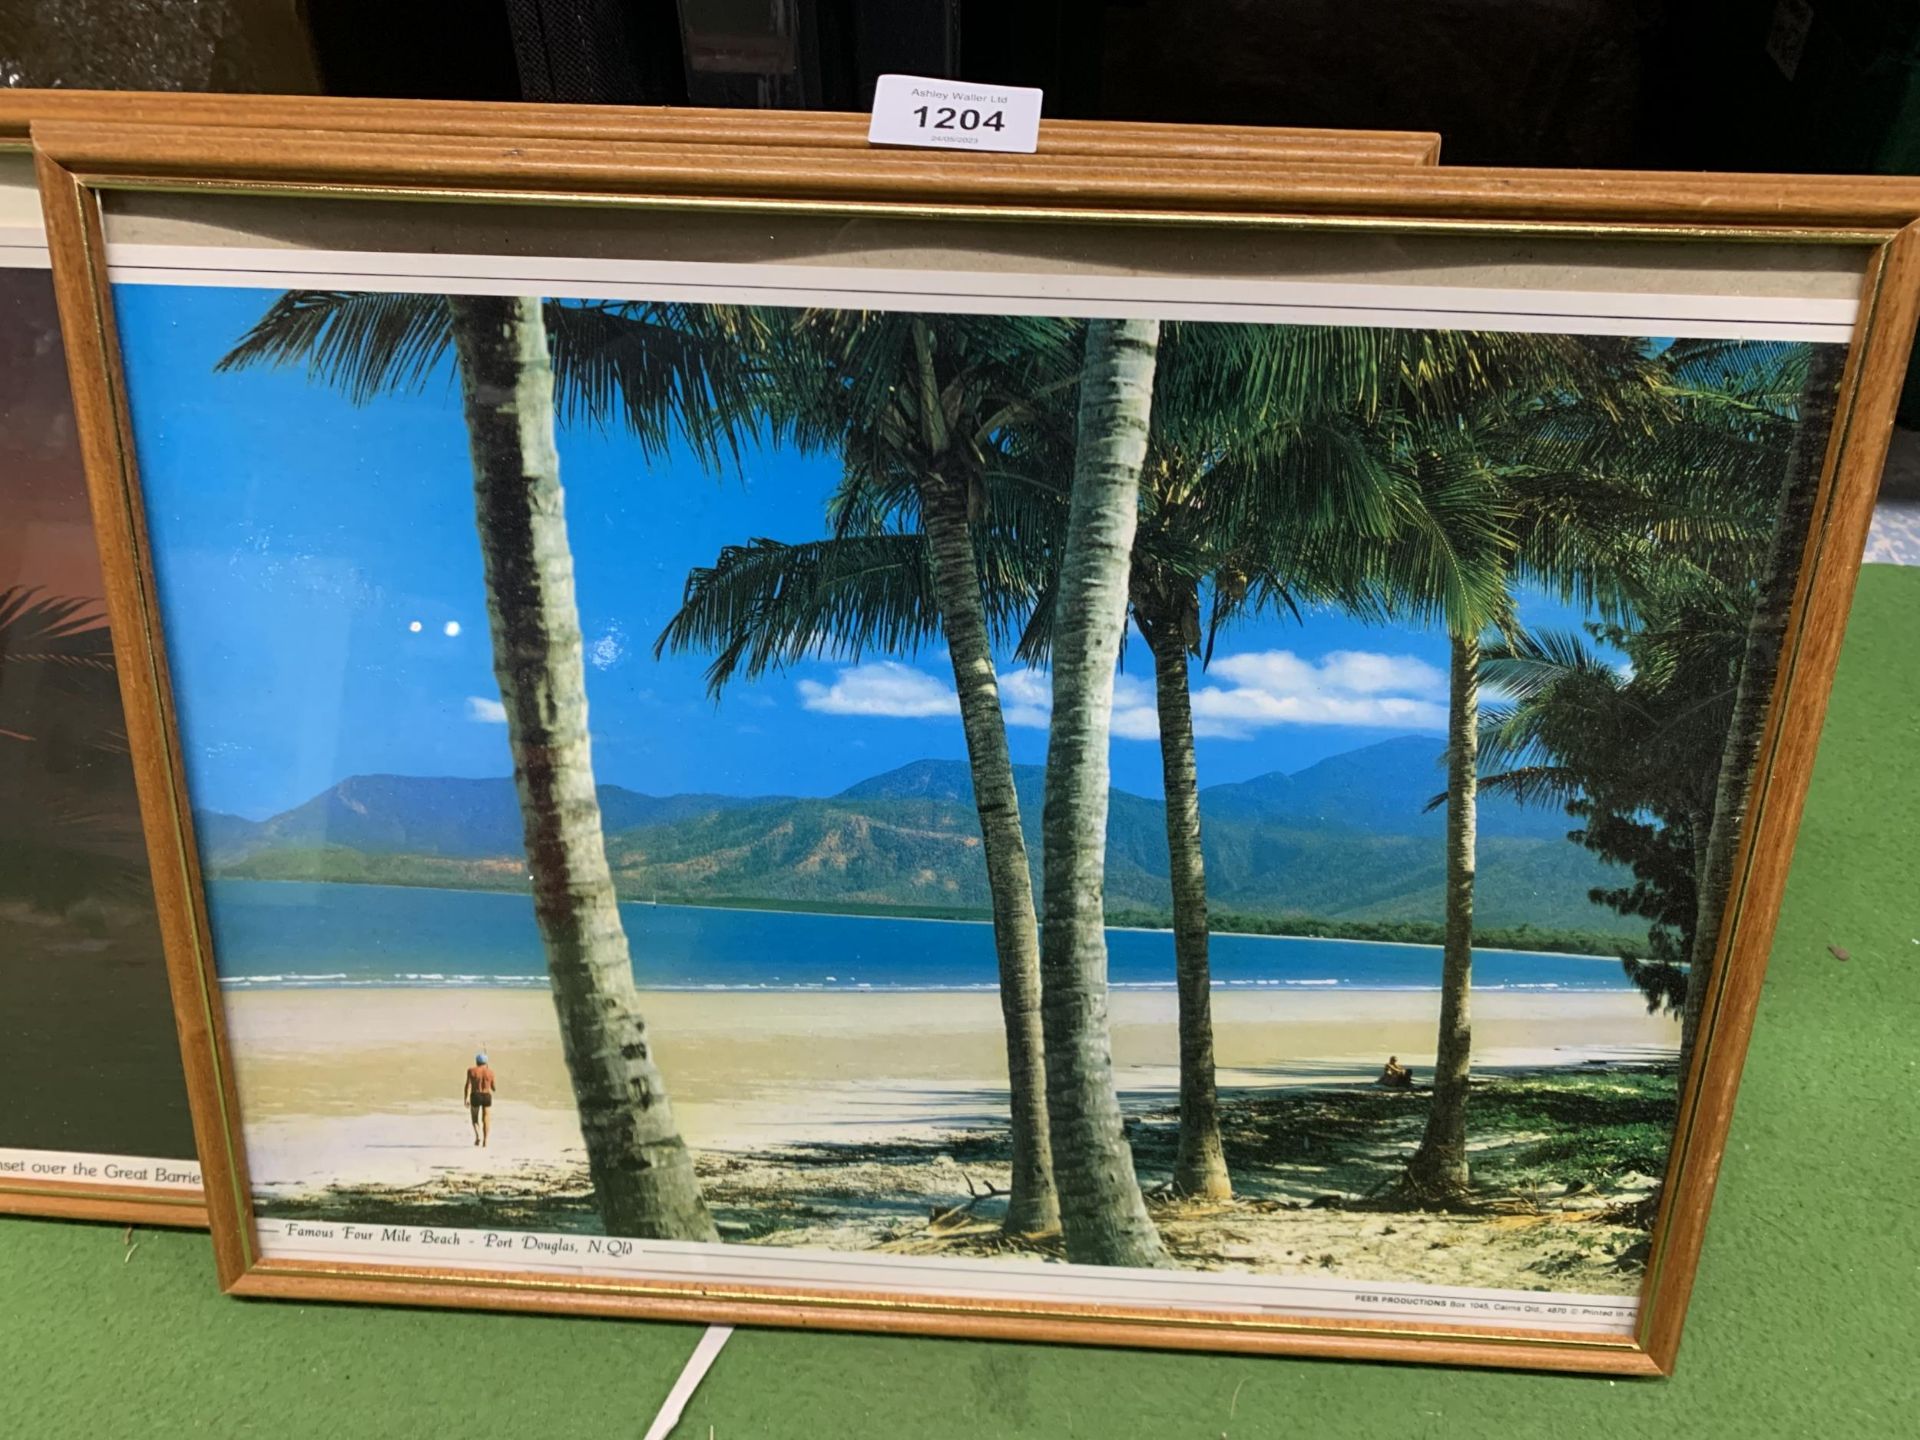 TWO FRAMED PRINTS, ONE OF SUNSET OVER THE GREAT BARRIER REEF, THE OTHER FOUR MILE BEACH, PORT - Image 2 of 4